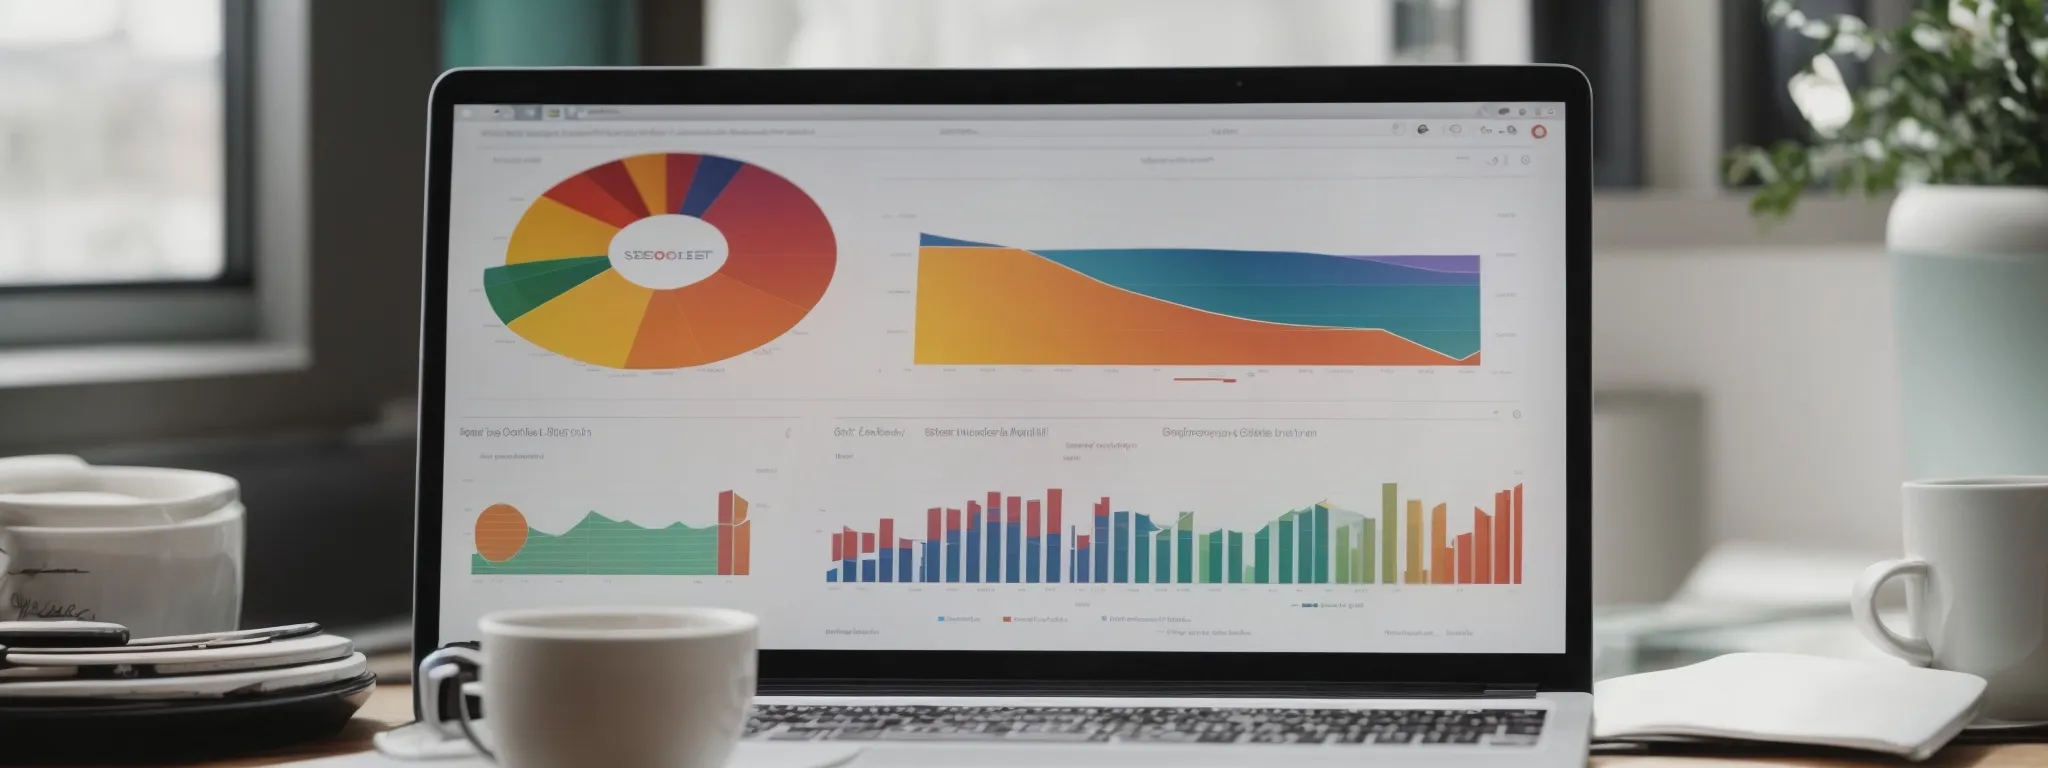 a laptop displaying colorful graphs and charts related to seo performance on a search engine's results page.